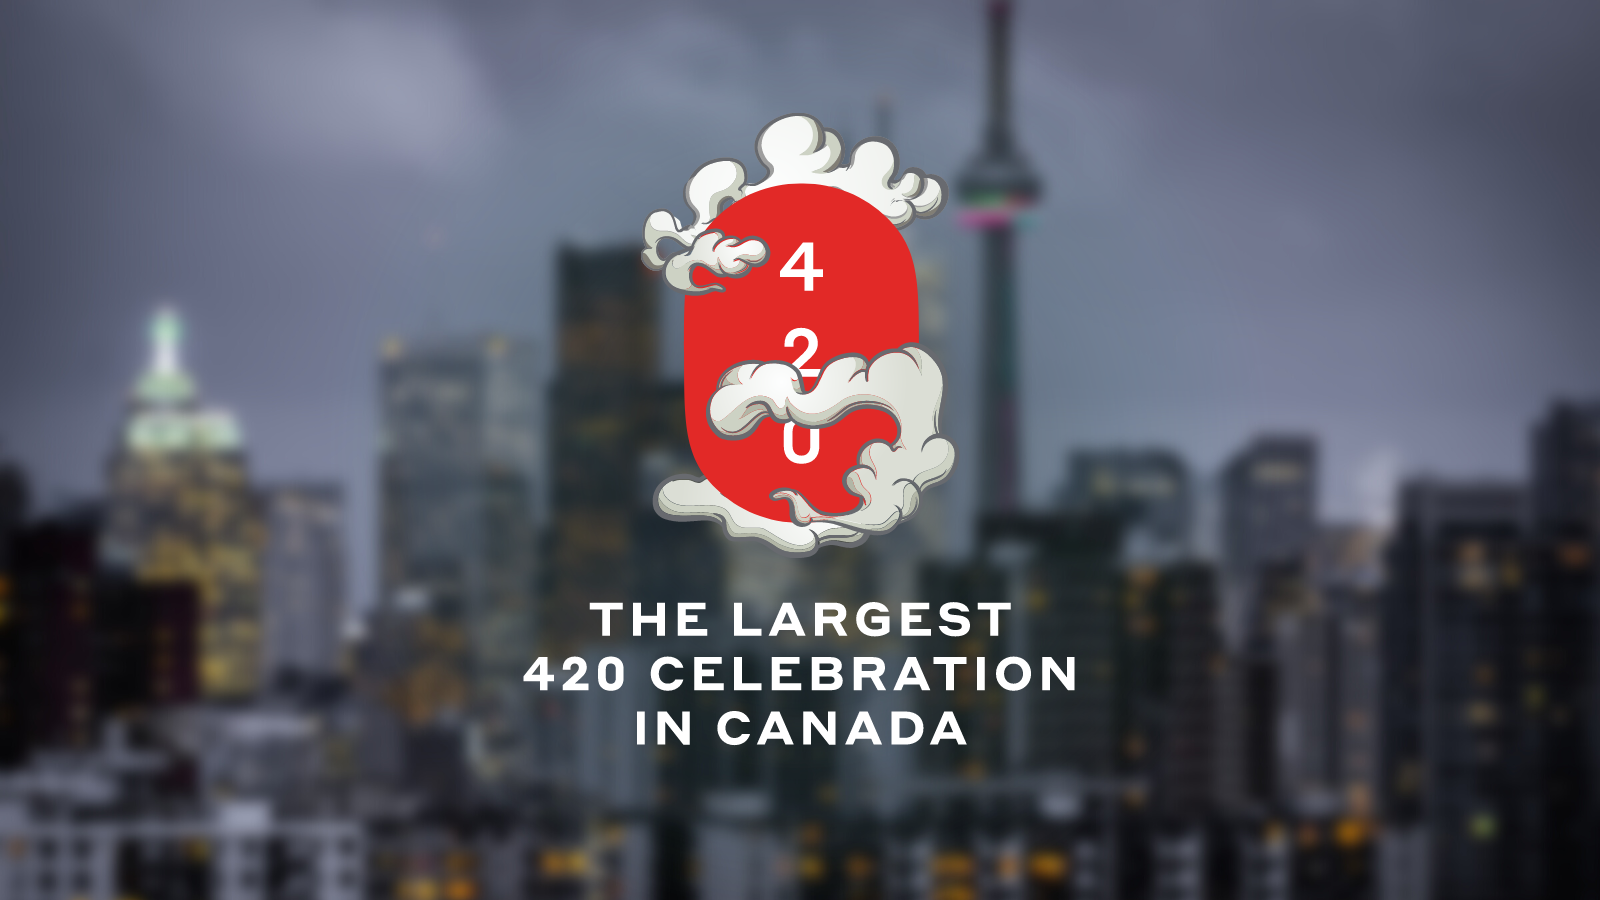 Tokyo Smoke to Host the Largest 4/20 Cannabis Celebration in Canada